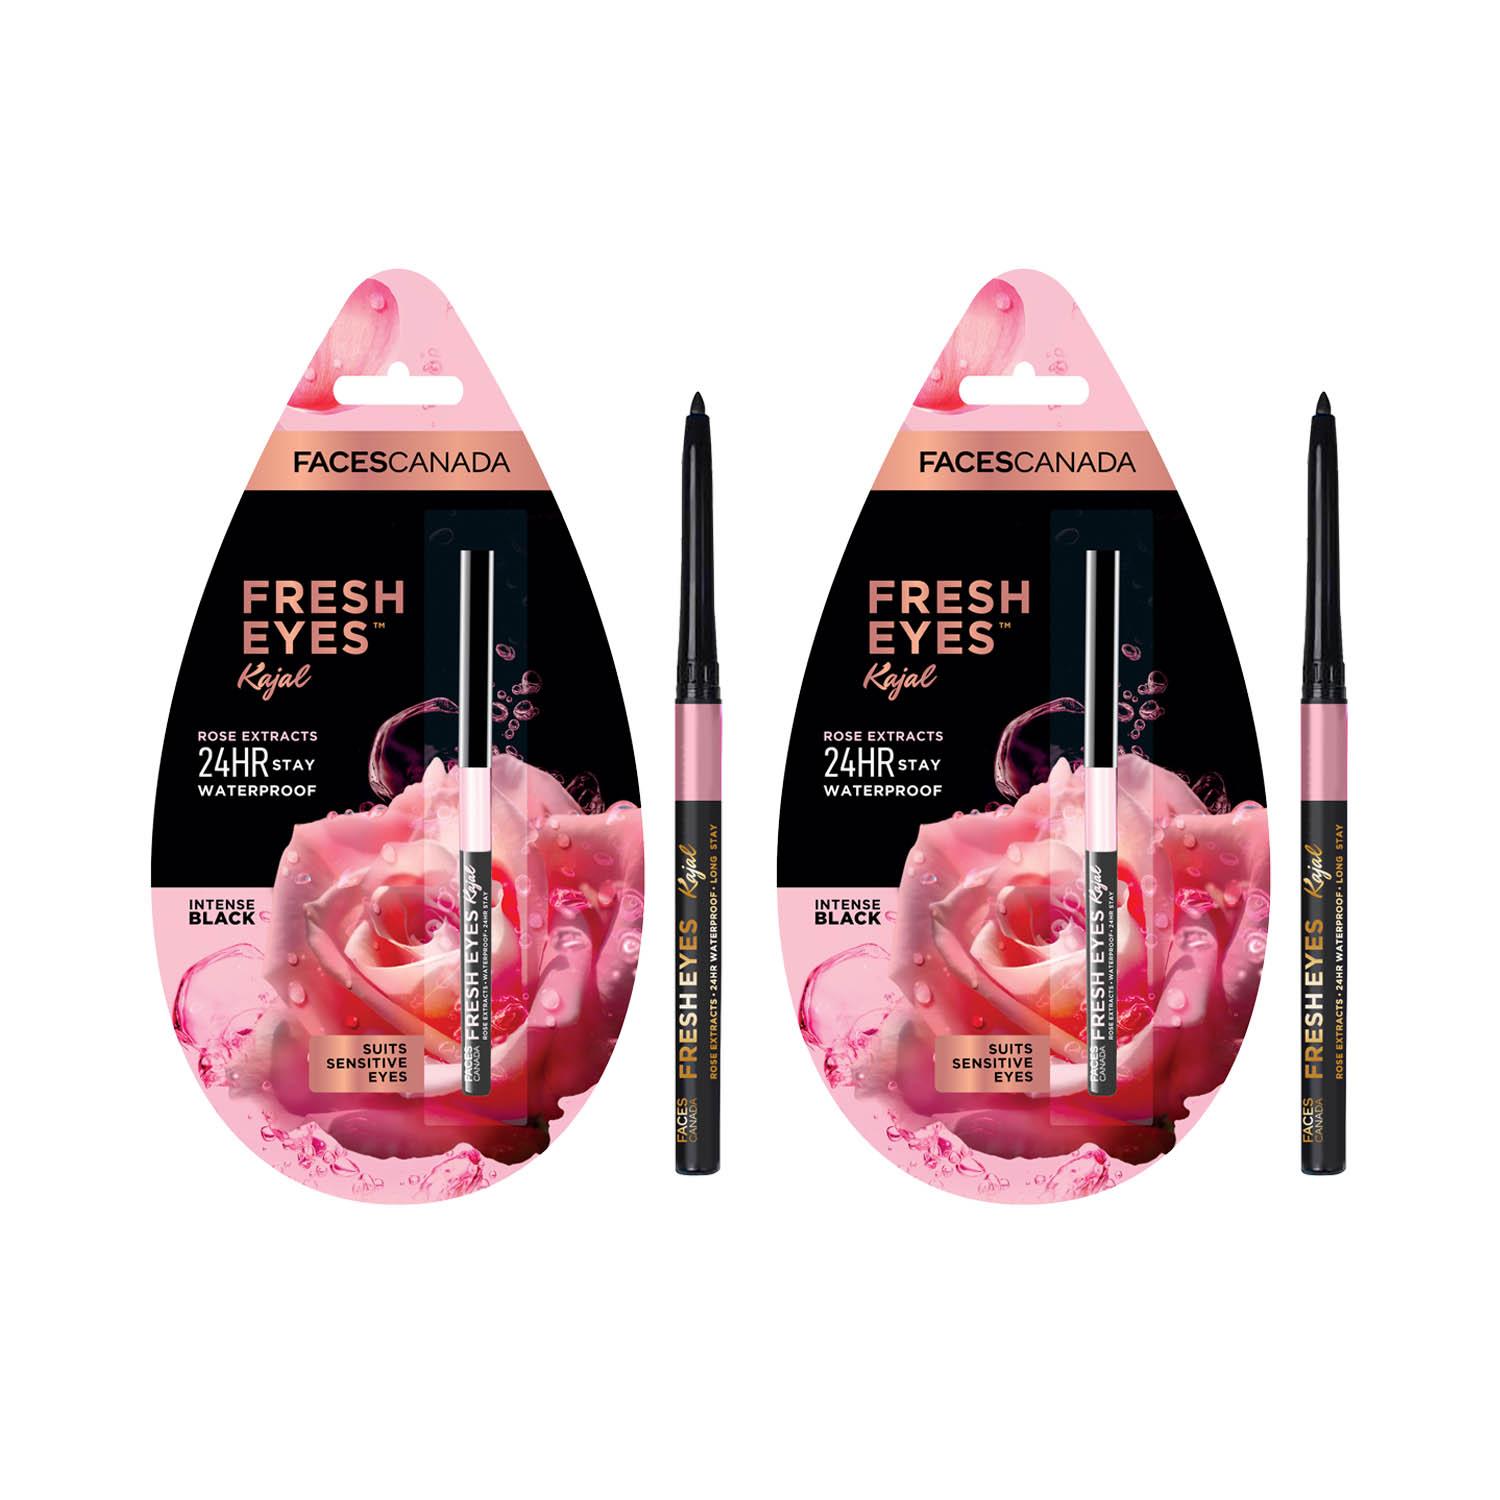 Faces Canada | Faces Canada Fresh Eyes Kajal - Black, (0.35g) With Rose Extract (Pack of 2) Combo